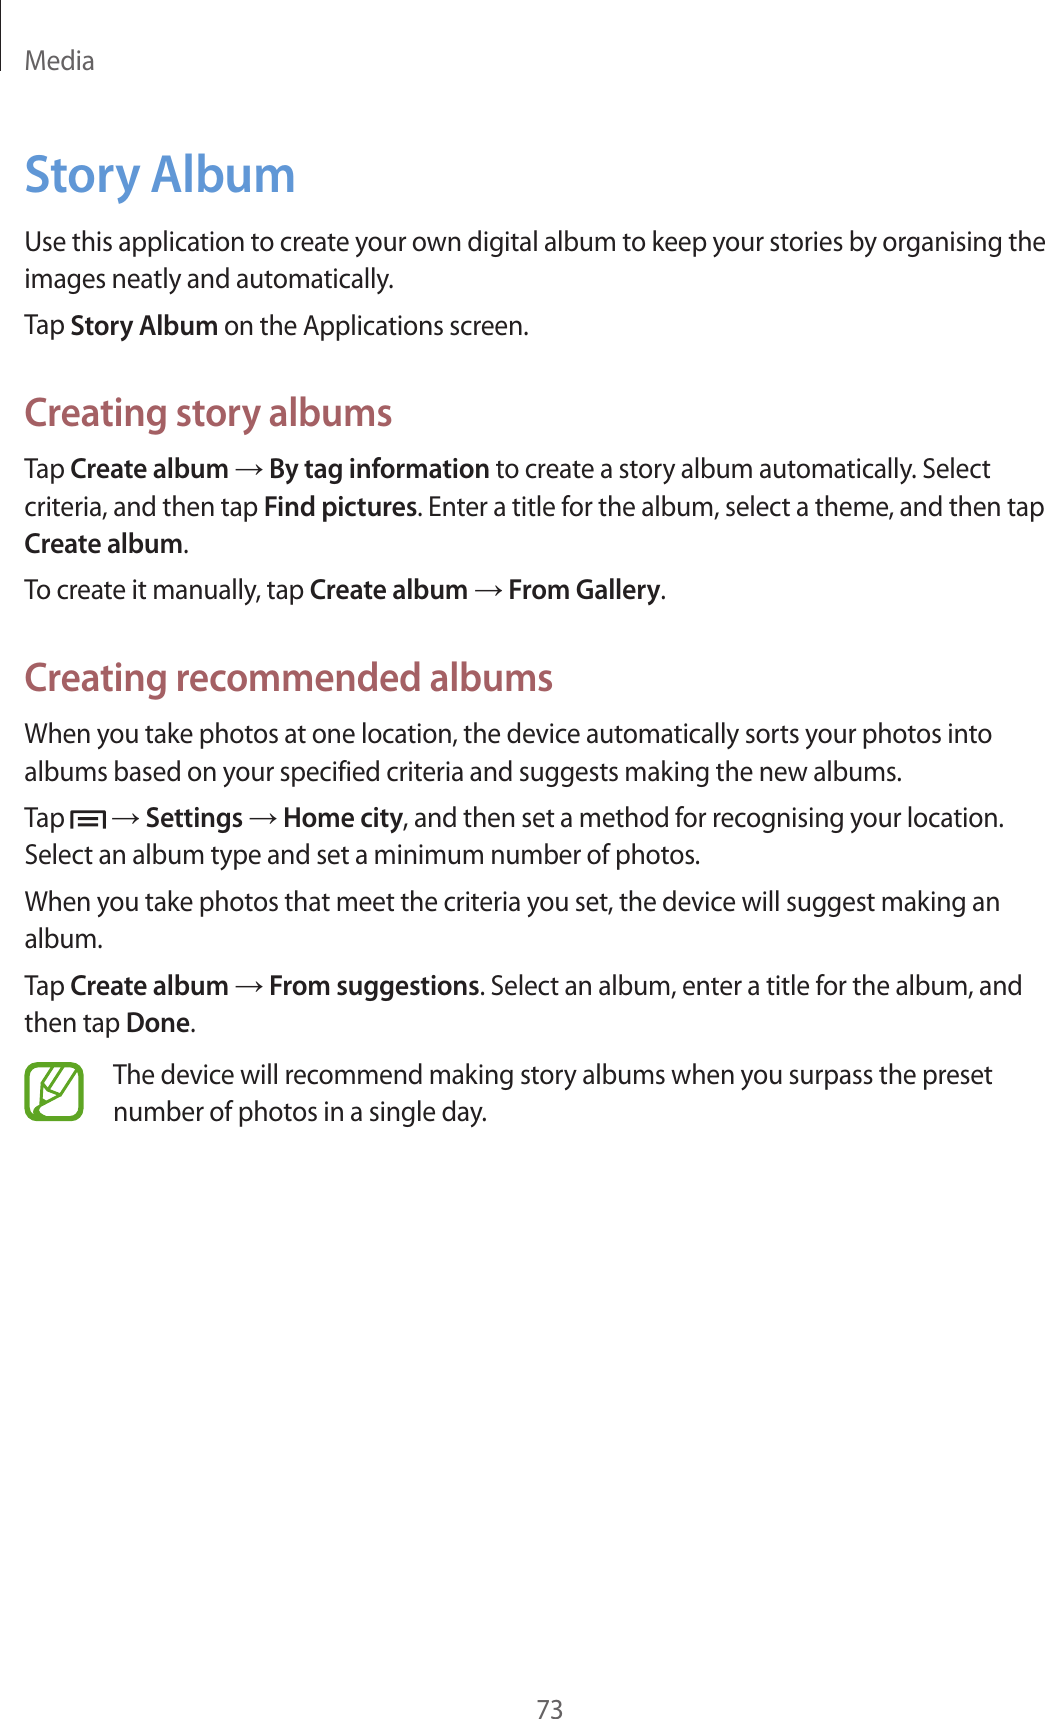 Media73Story AlbumUse this application to create your own digital album to keep your stories by organising the images neatly and automatically.Tap Story Album on the Applications screen.Creating story albumsTap Create album → By tag information to create a story album automatically. Select criteria, and then tap Find pictures. Enter a title for the album, select a theme, and then tap Create album.To create it manually, tap Create album → From Gallery.Creating recommended albumsWhen you take photos at one location, the device automatically sorts your photos into albums based on your specified criteria and suggests making the new albums.Tap   → Settings → Home city, and then set a method for recognising your location. Select an album type and set a minimum number of photos.When you take photos that meet the criteria you set, the device will suggest making an album.Tap Create album → From suggestions. Select an album, enter a title for the album, and then tap Done.The device will recommend making story albums when you surpass the preset number of photos in a single day.